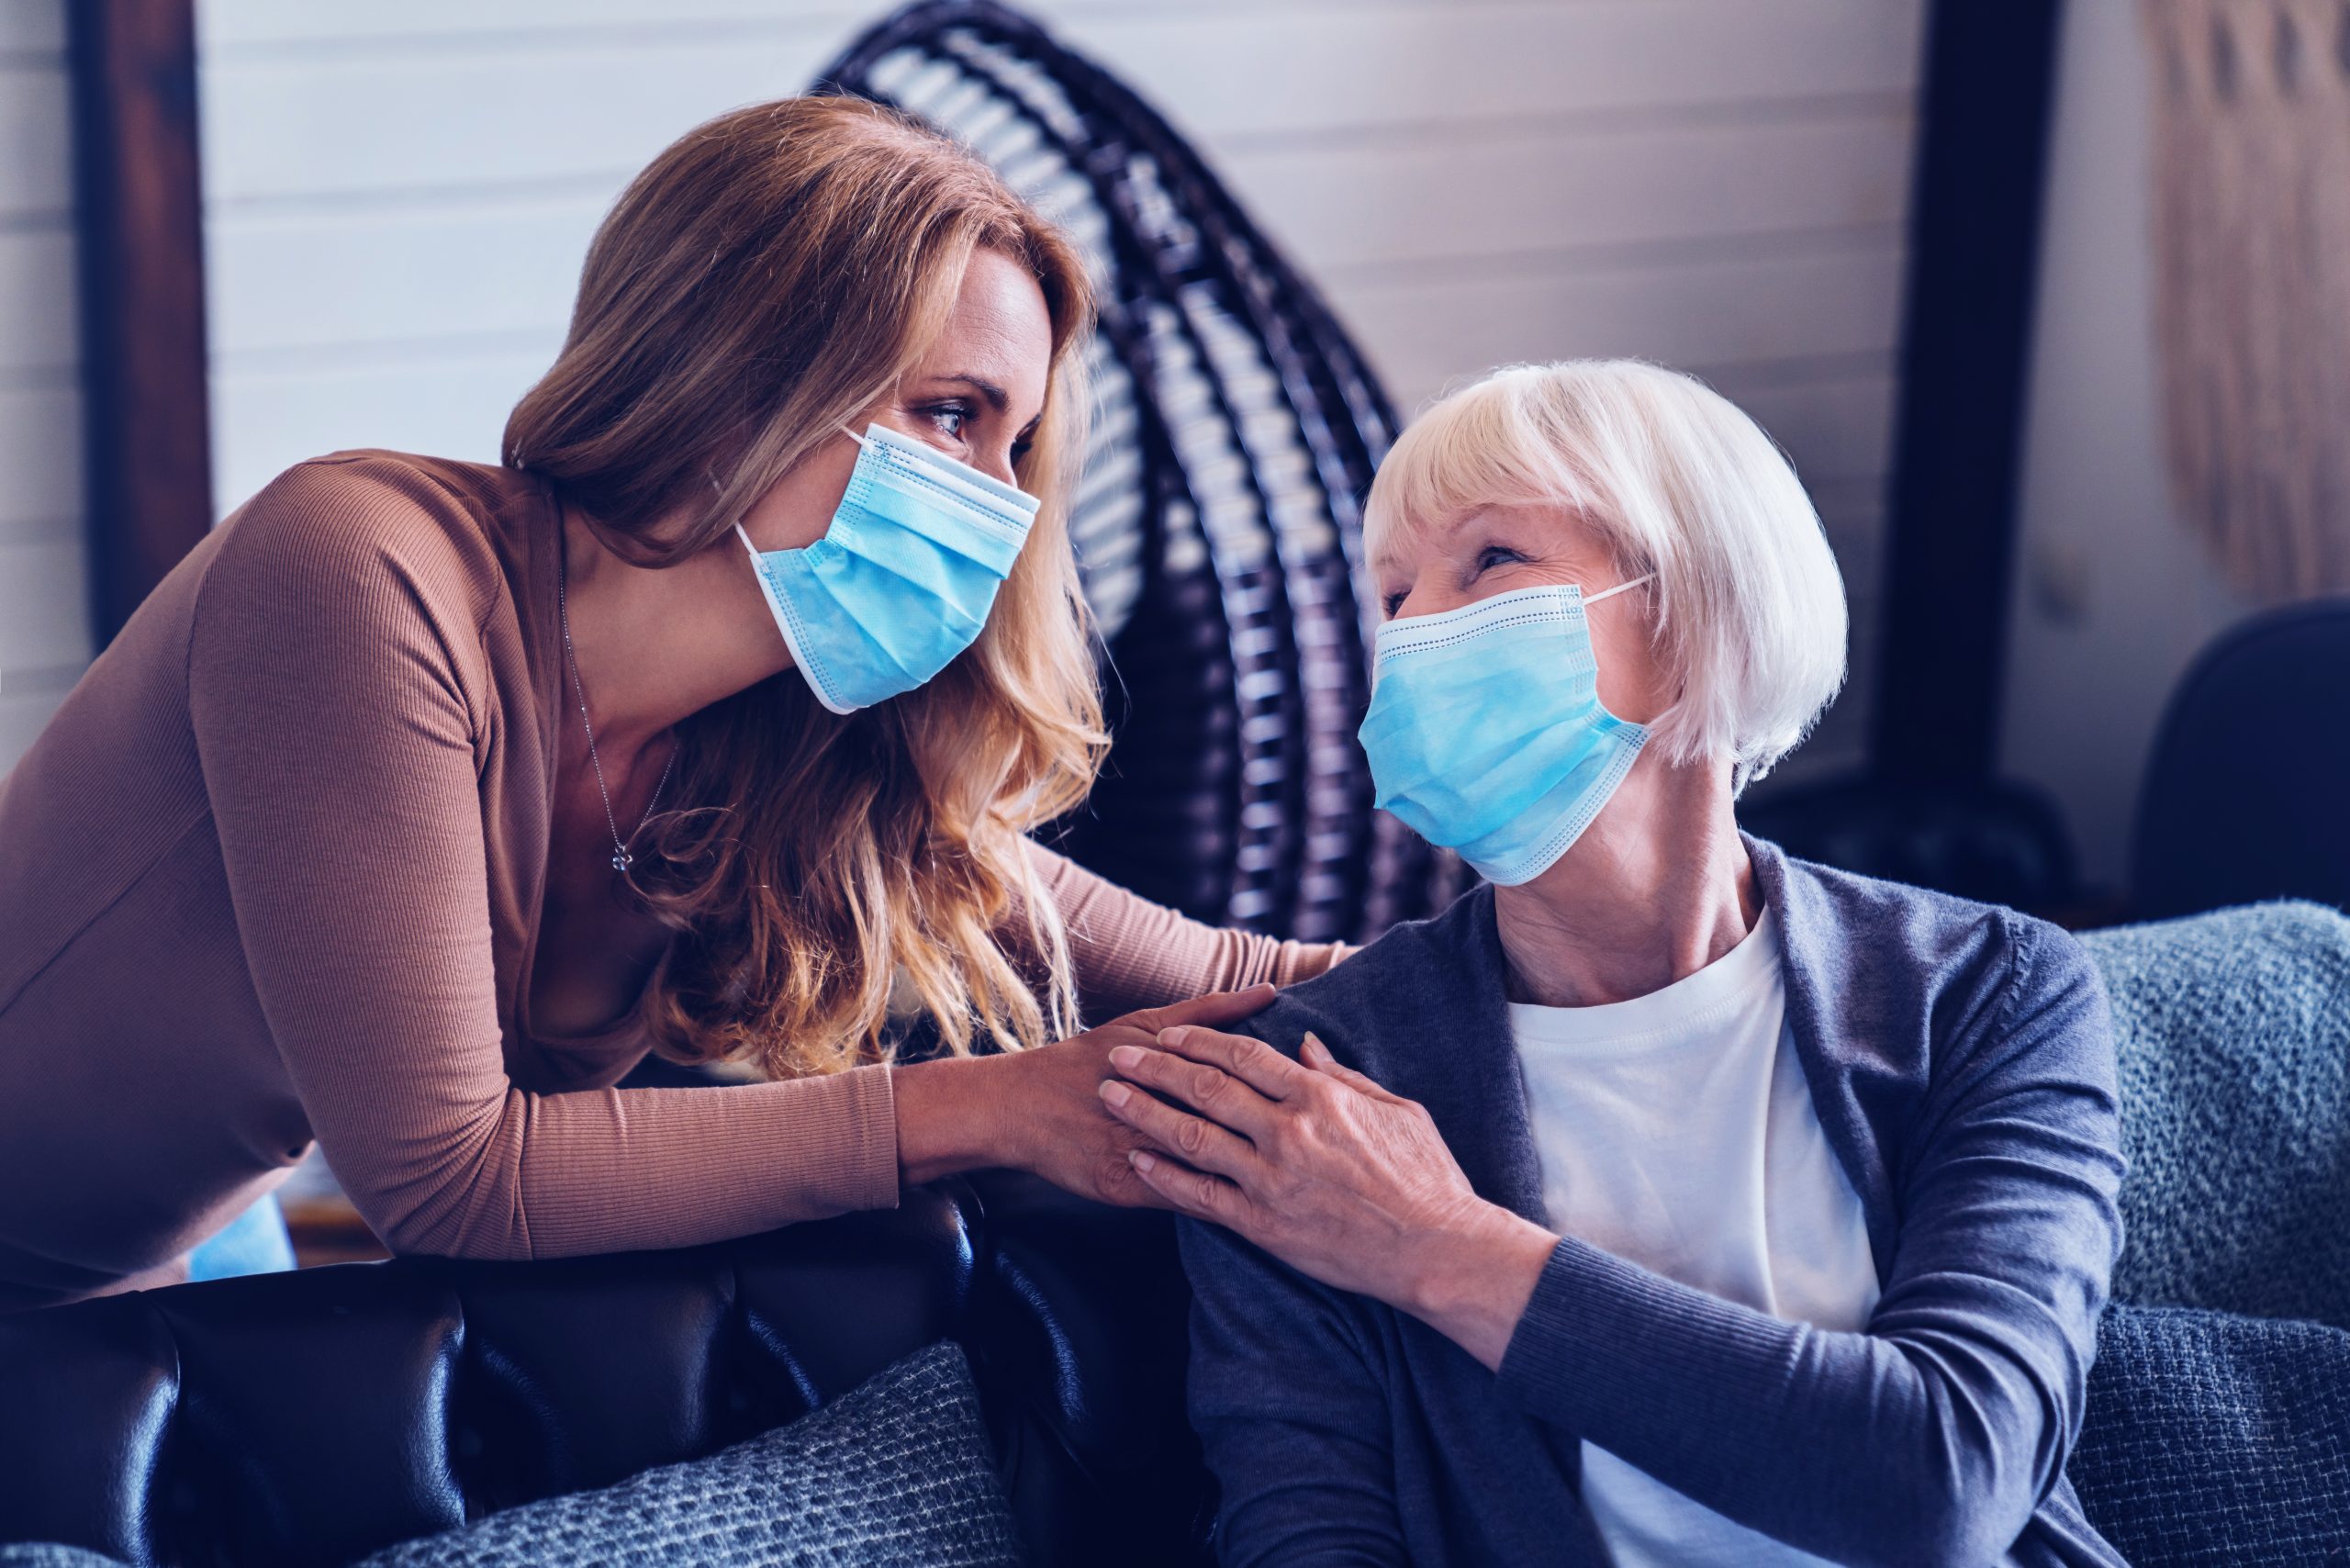 Two women wearing medical masks are engaged in a comforting conversation, with the younger one gently touching the elder's shoulder. The elder looks reassured, possibly discussing something sensitive like pharmaceutical packaging for her medication during a challenging time.